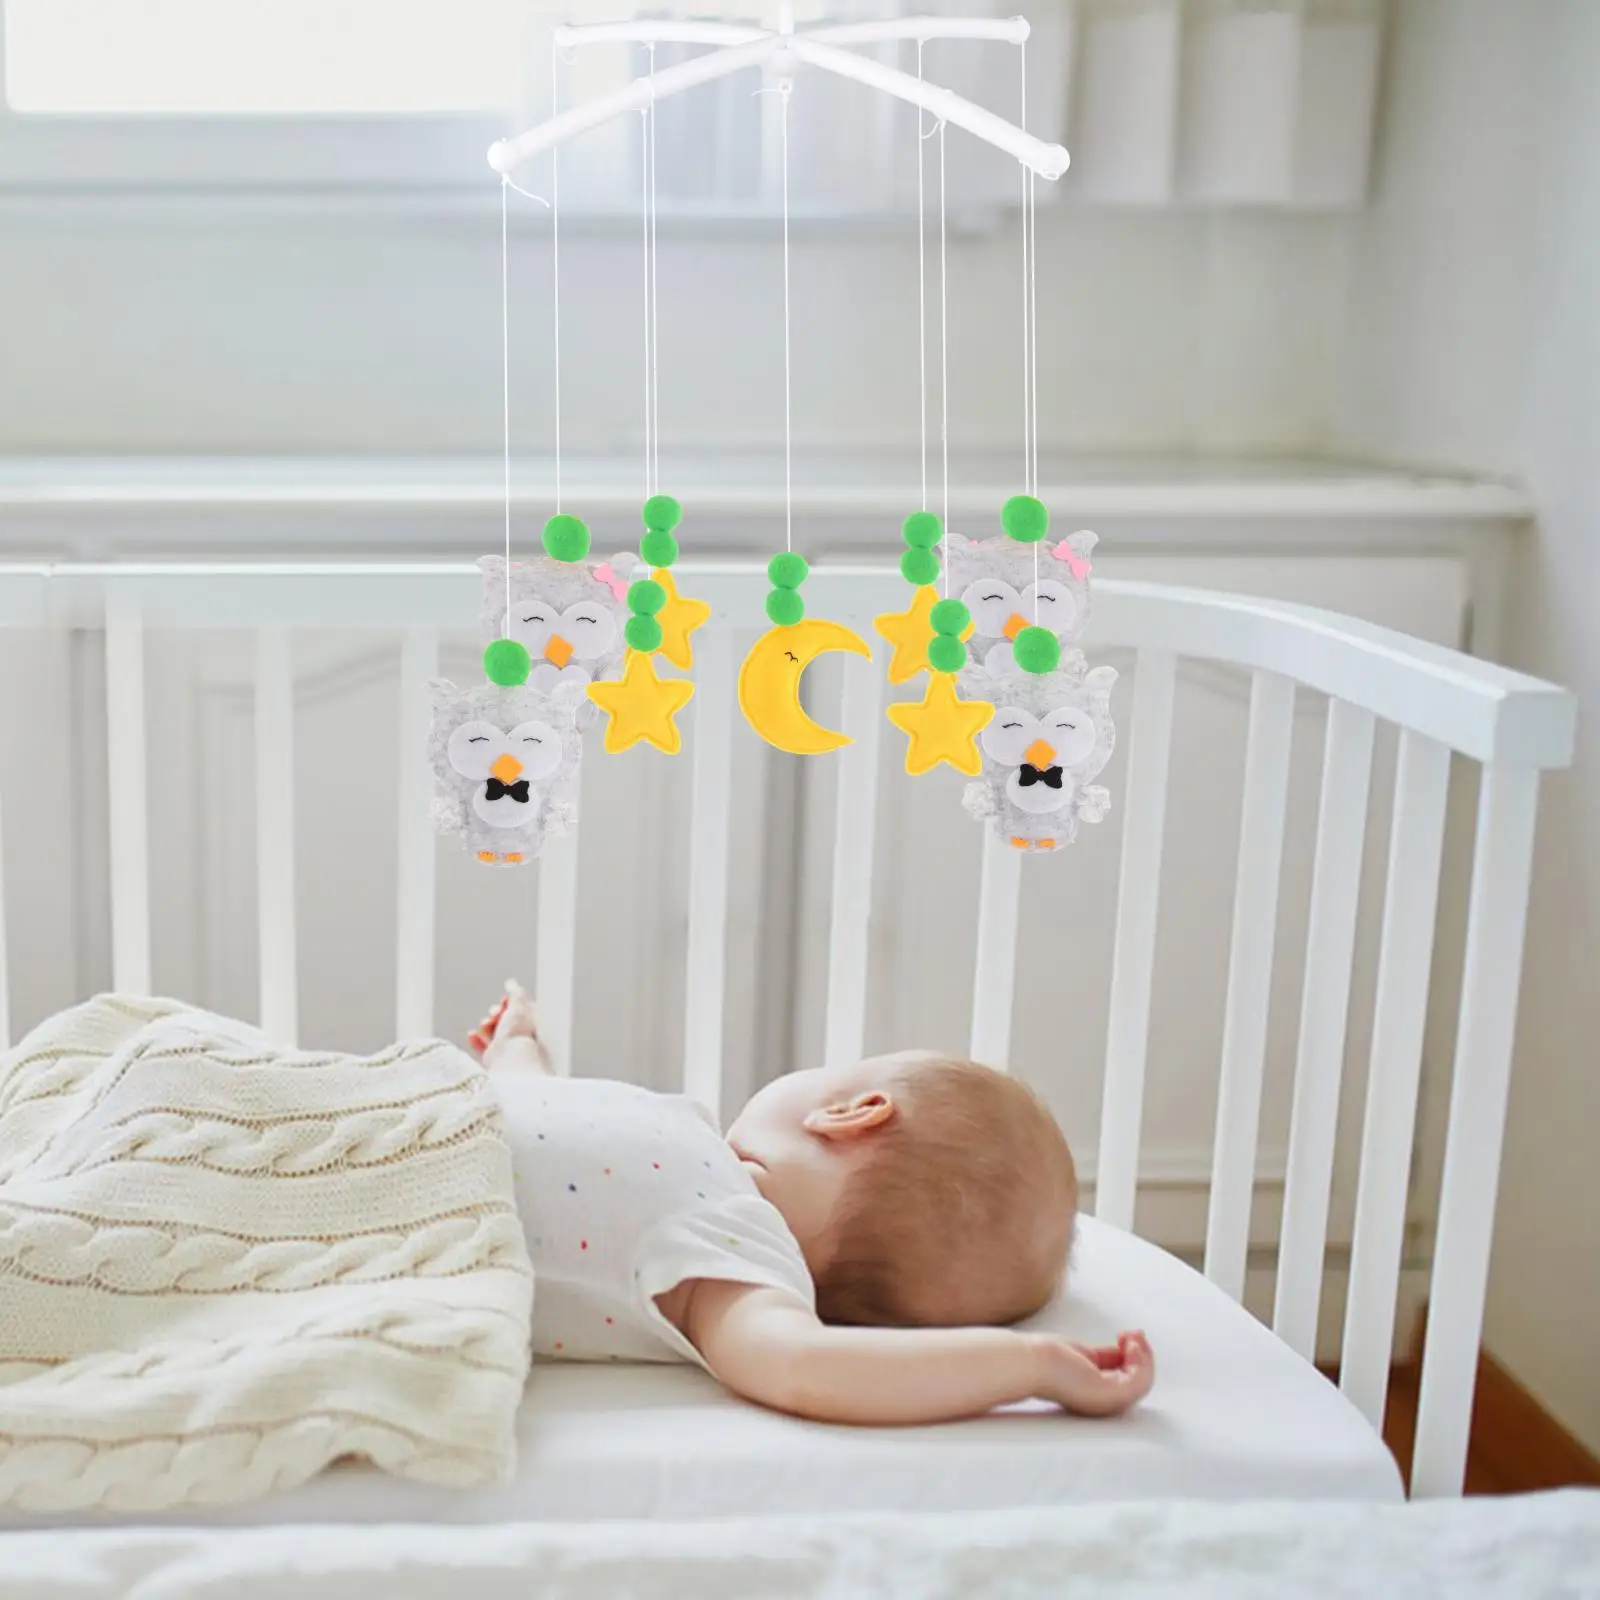 Crib Hanging toy Rattle Toy Interactive Sensory Toy Cute toy Crib Mobile for Crib holiday Room Bedroom